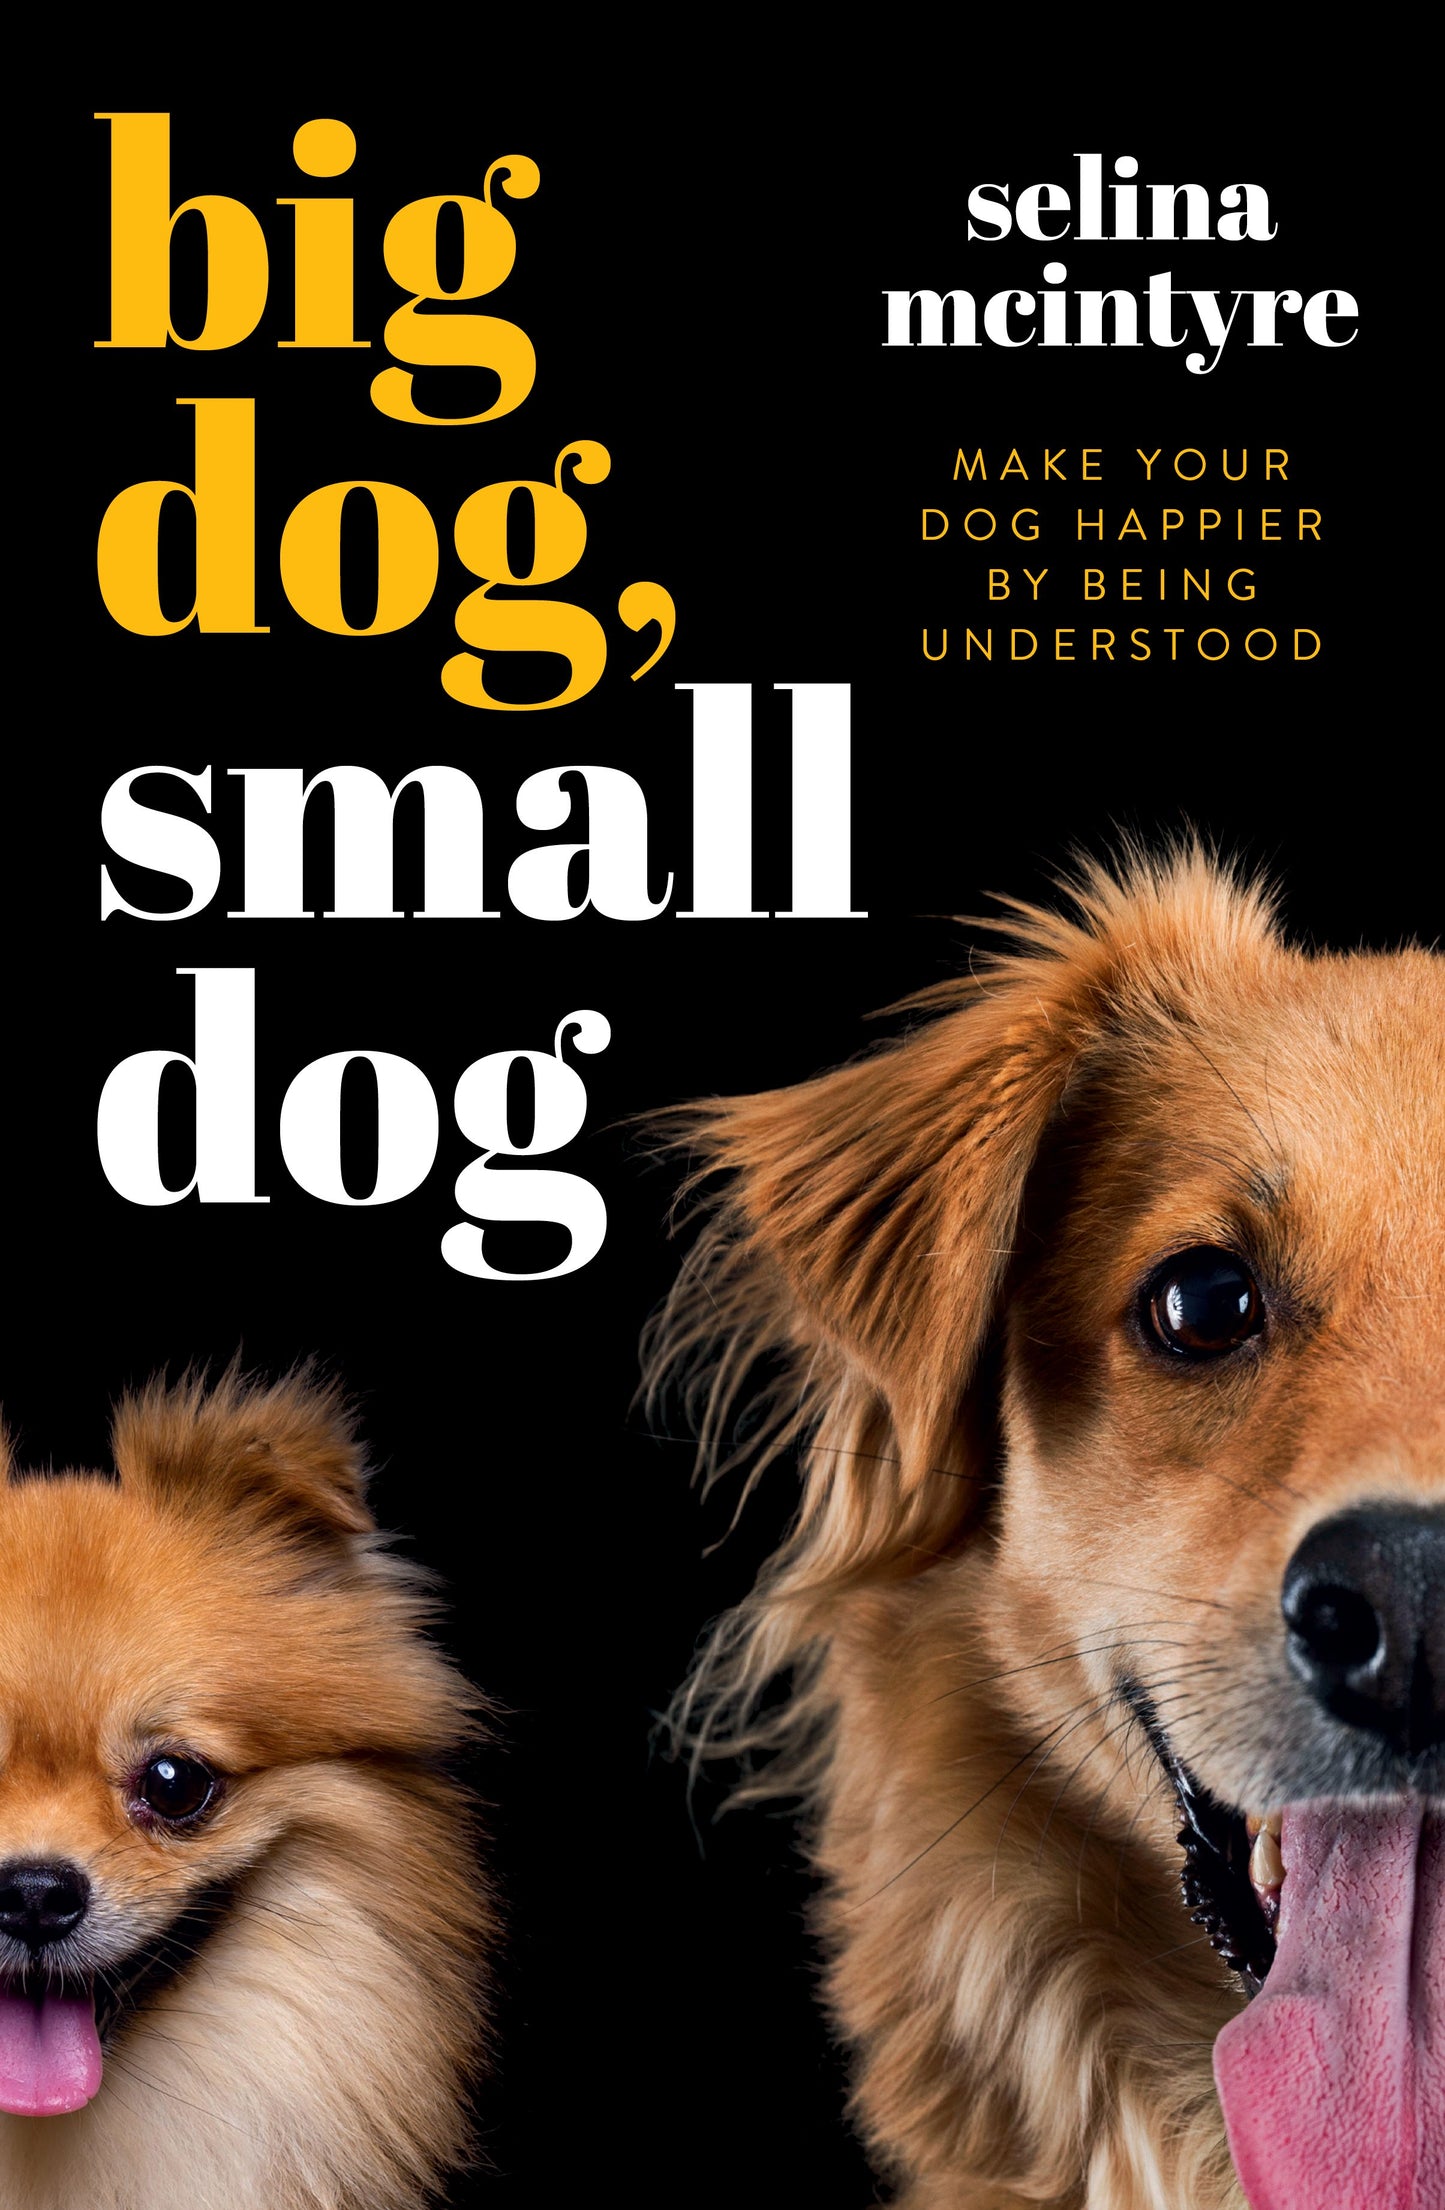 Big Dog Small Dog: Make Your Dog Happier By Being Understood by Selina McIntyre - City Books & Lotto